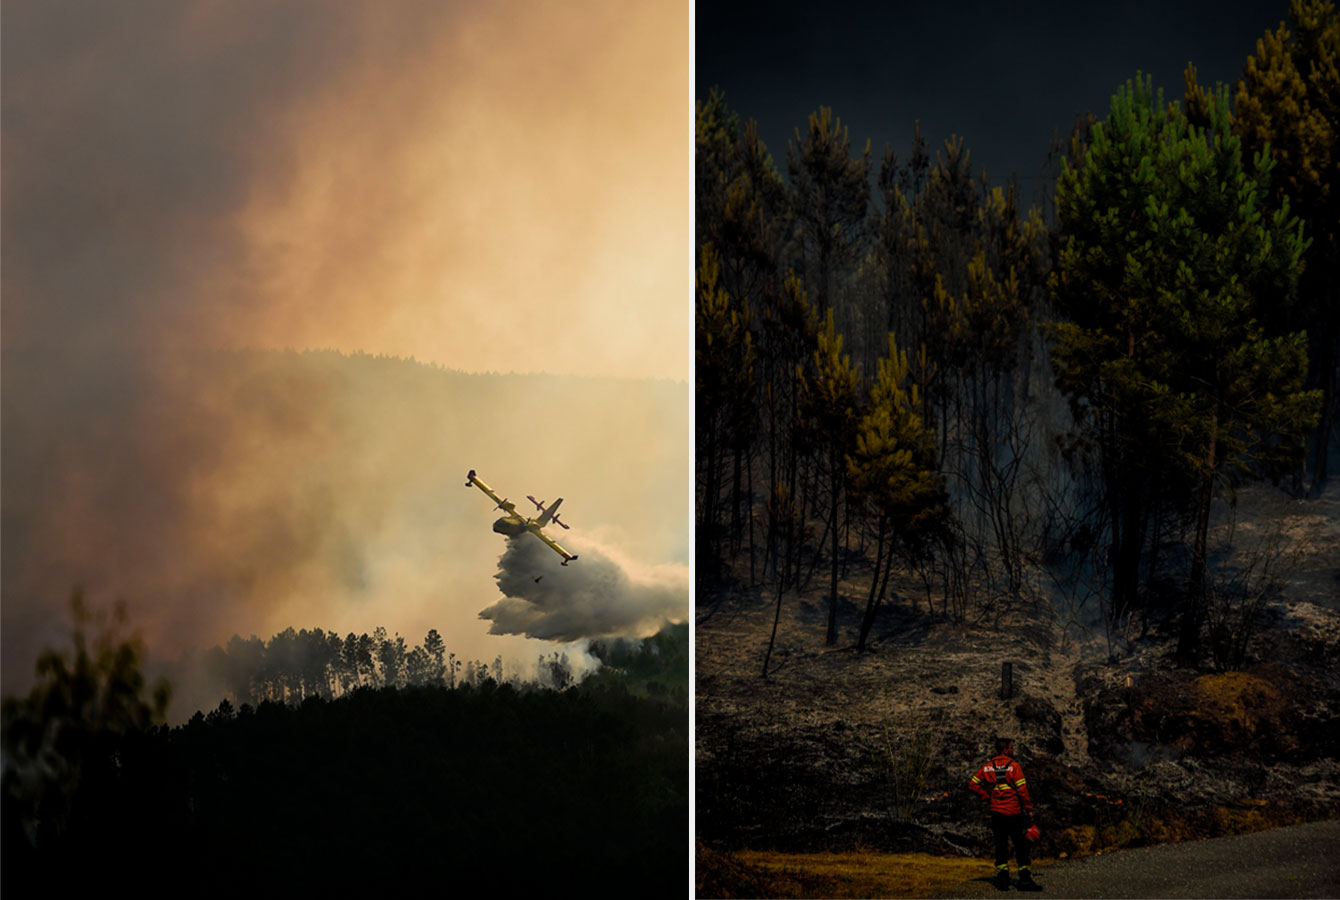 Left: firefighter plan dropping water over a wildfire in a forest, the sky filled with smoke; right: a firefighter standing in a road looking at damage from a wildfire with ash and burnt foliage among partially burnt trees